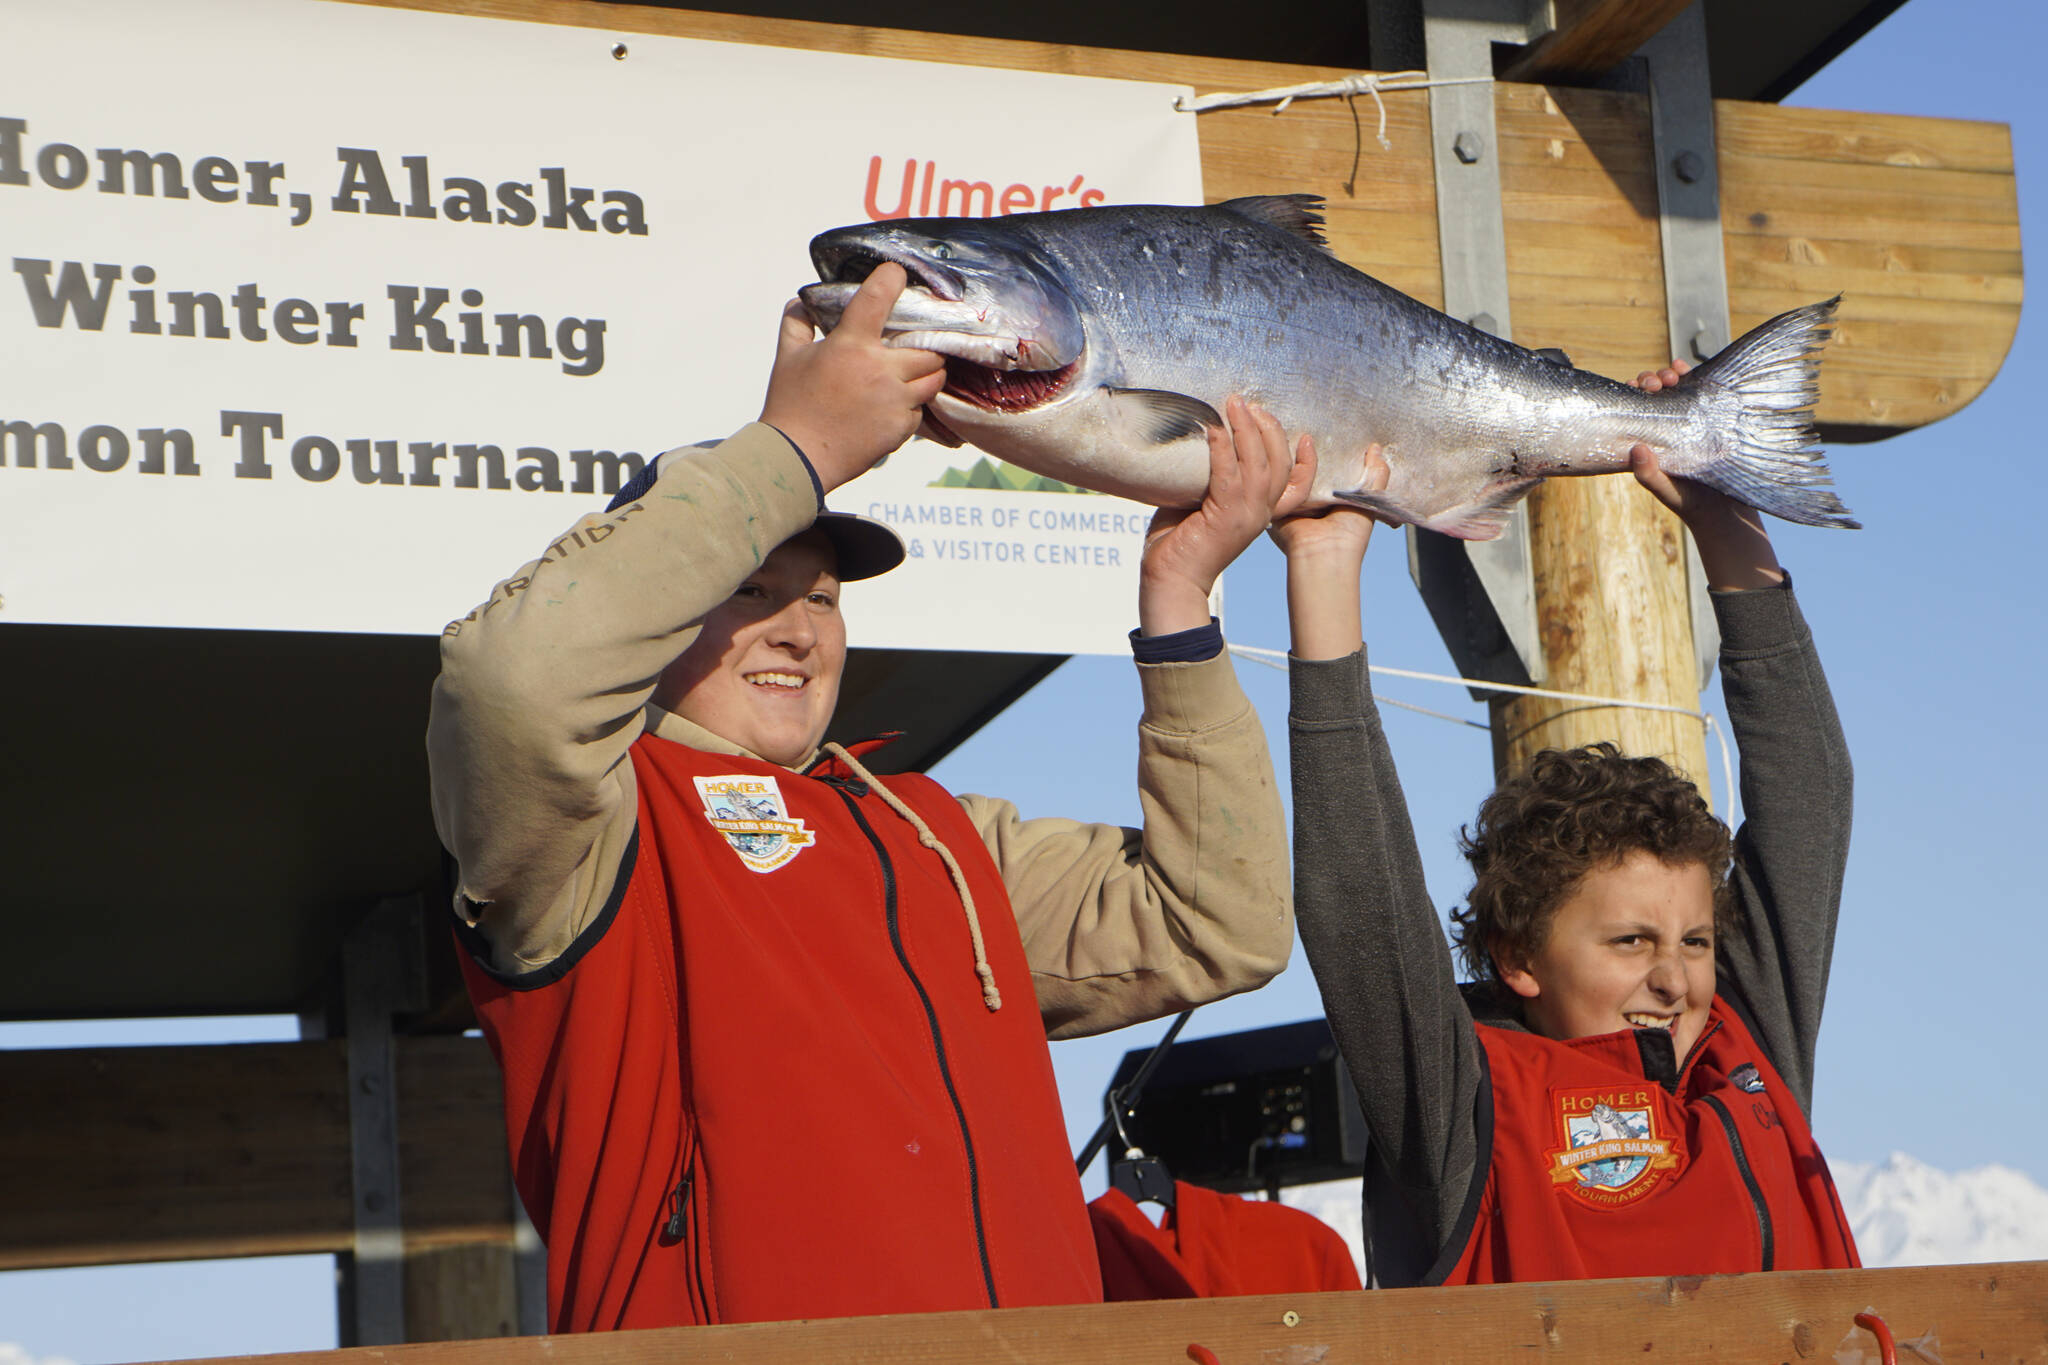 Weston Marley, left, holds up the 27.38-pound winter king salmon he caught to win the 28th annual Homer Winter King Salmon Tournament on Sunday, April 10, 2022, in Kachemak Bay, Homer, Alaska. At right is last year’s champion and Weston’s brother, Andrew Marley, 11 — the youngest angler ever to win the tournament. Weston Marley, 15, fished on the Fly Dough with his father, Jay Marley. (Photo by Michael Armstrong/Homer News)